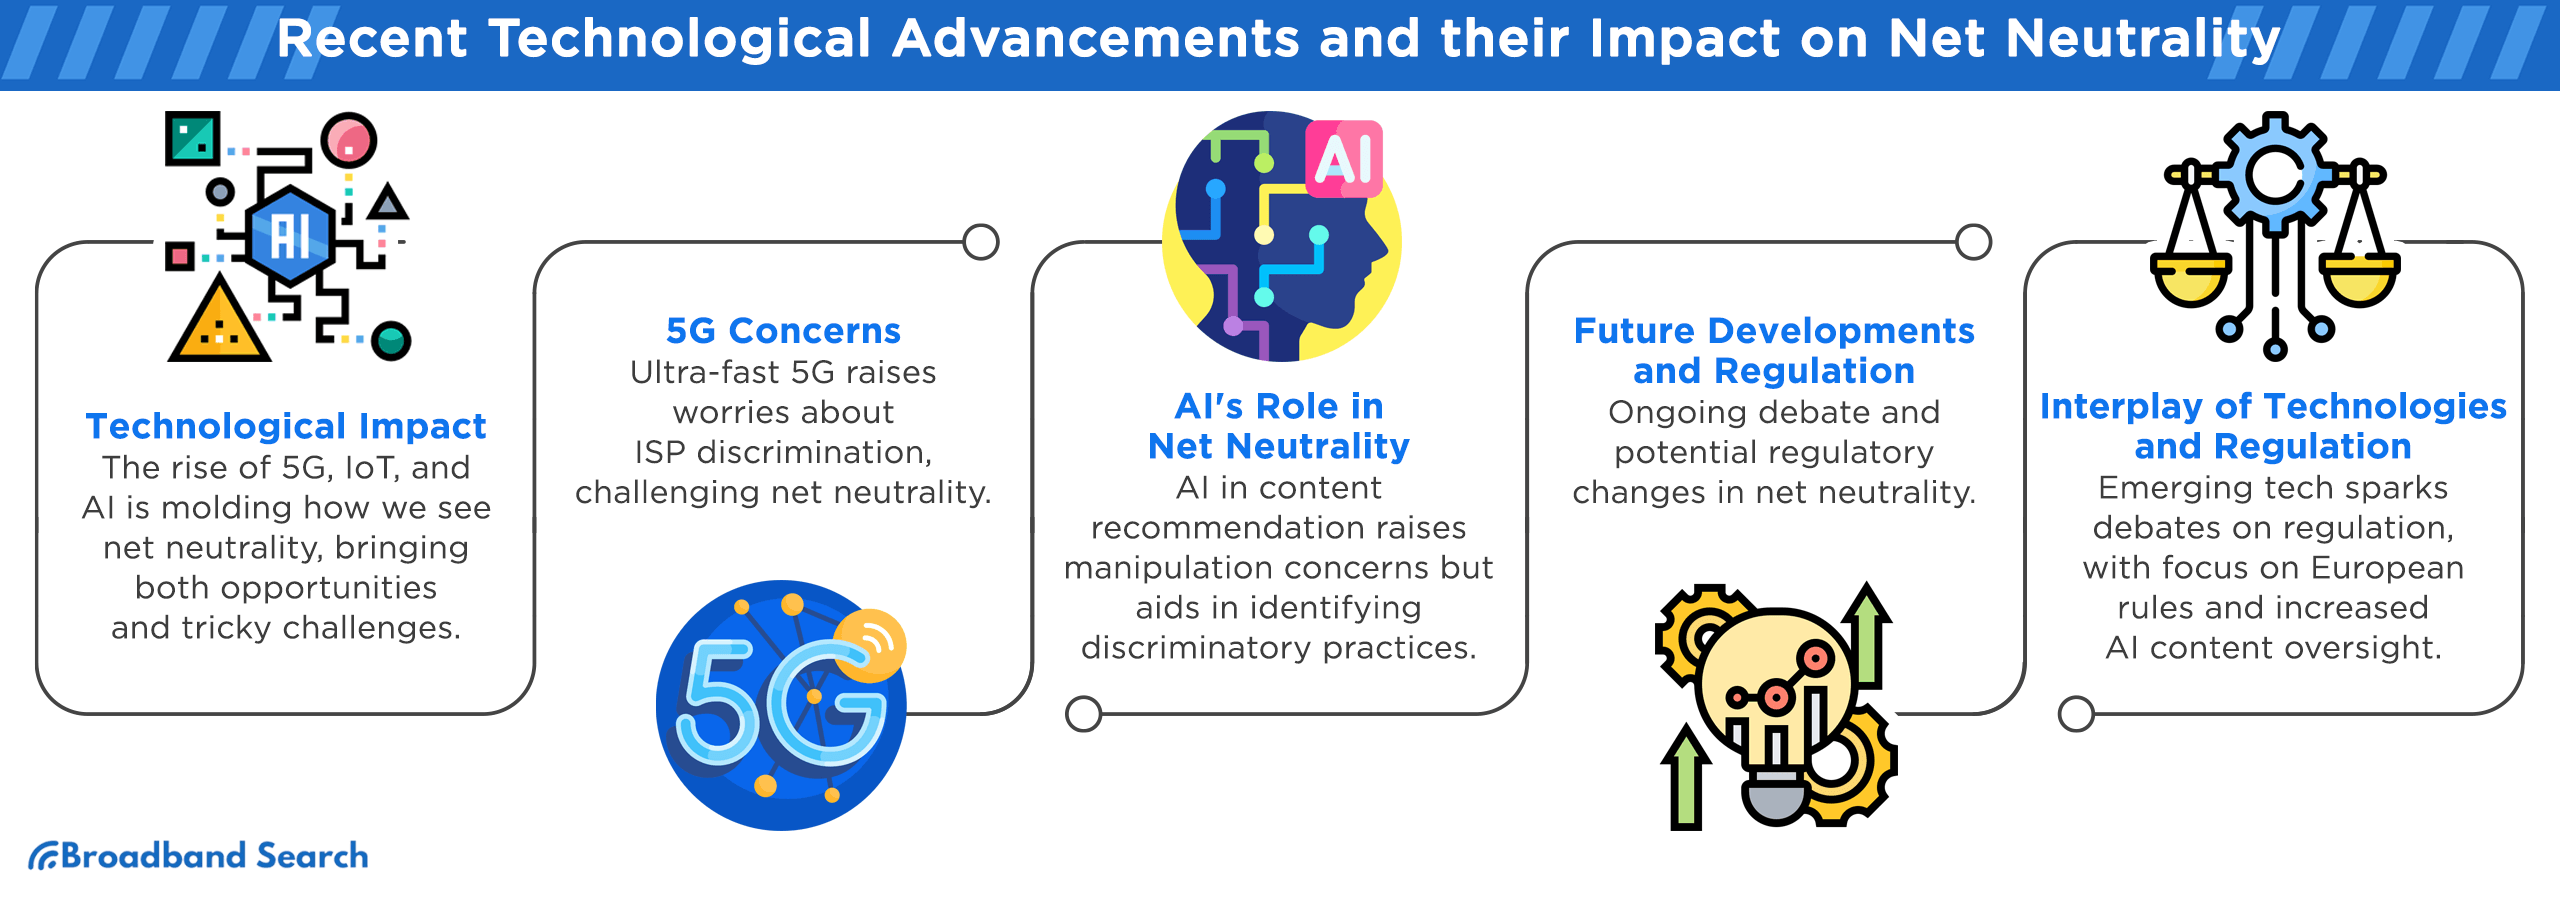 Recent technological advancements and their impact on net neutrality